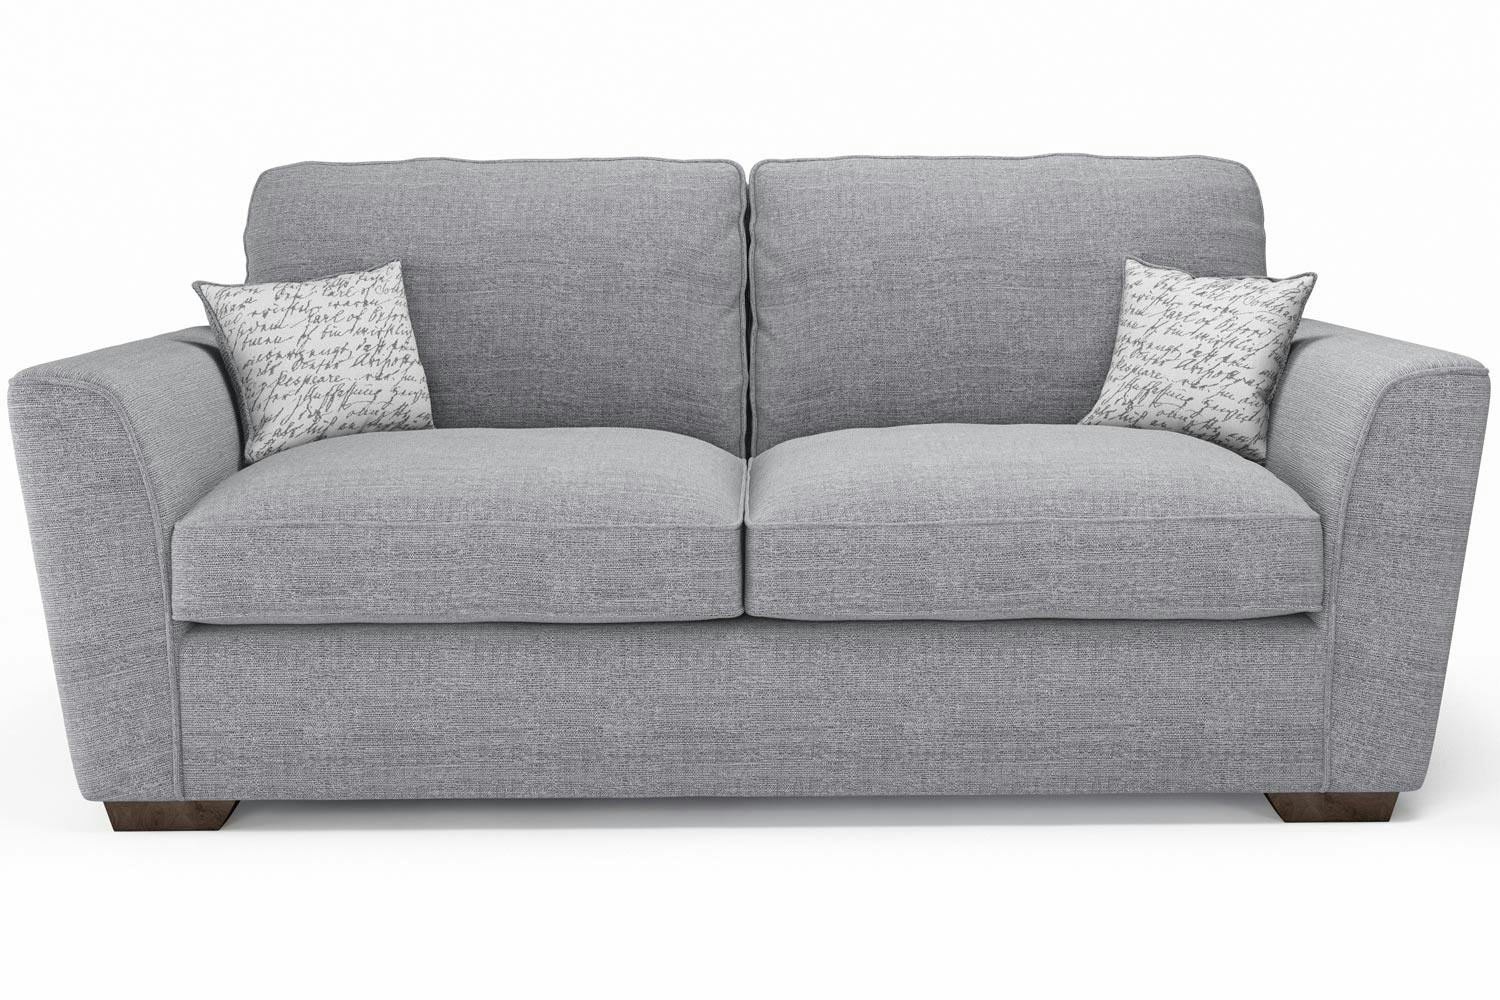 best value 3 seater sofa bed